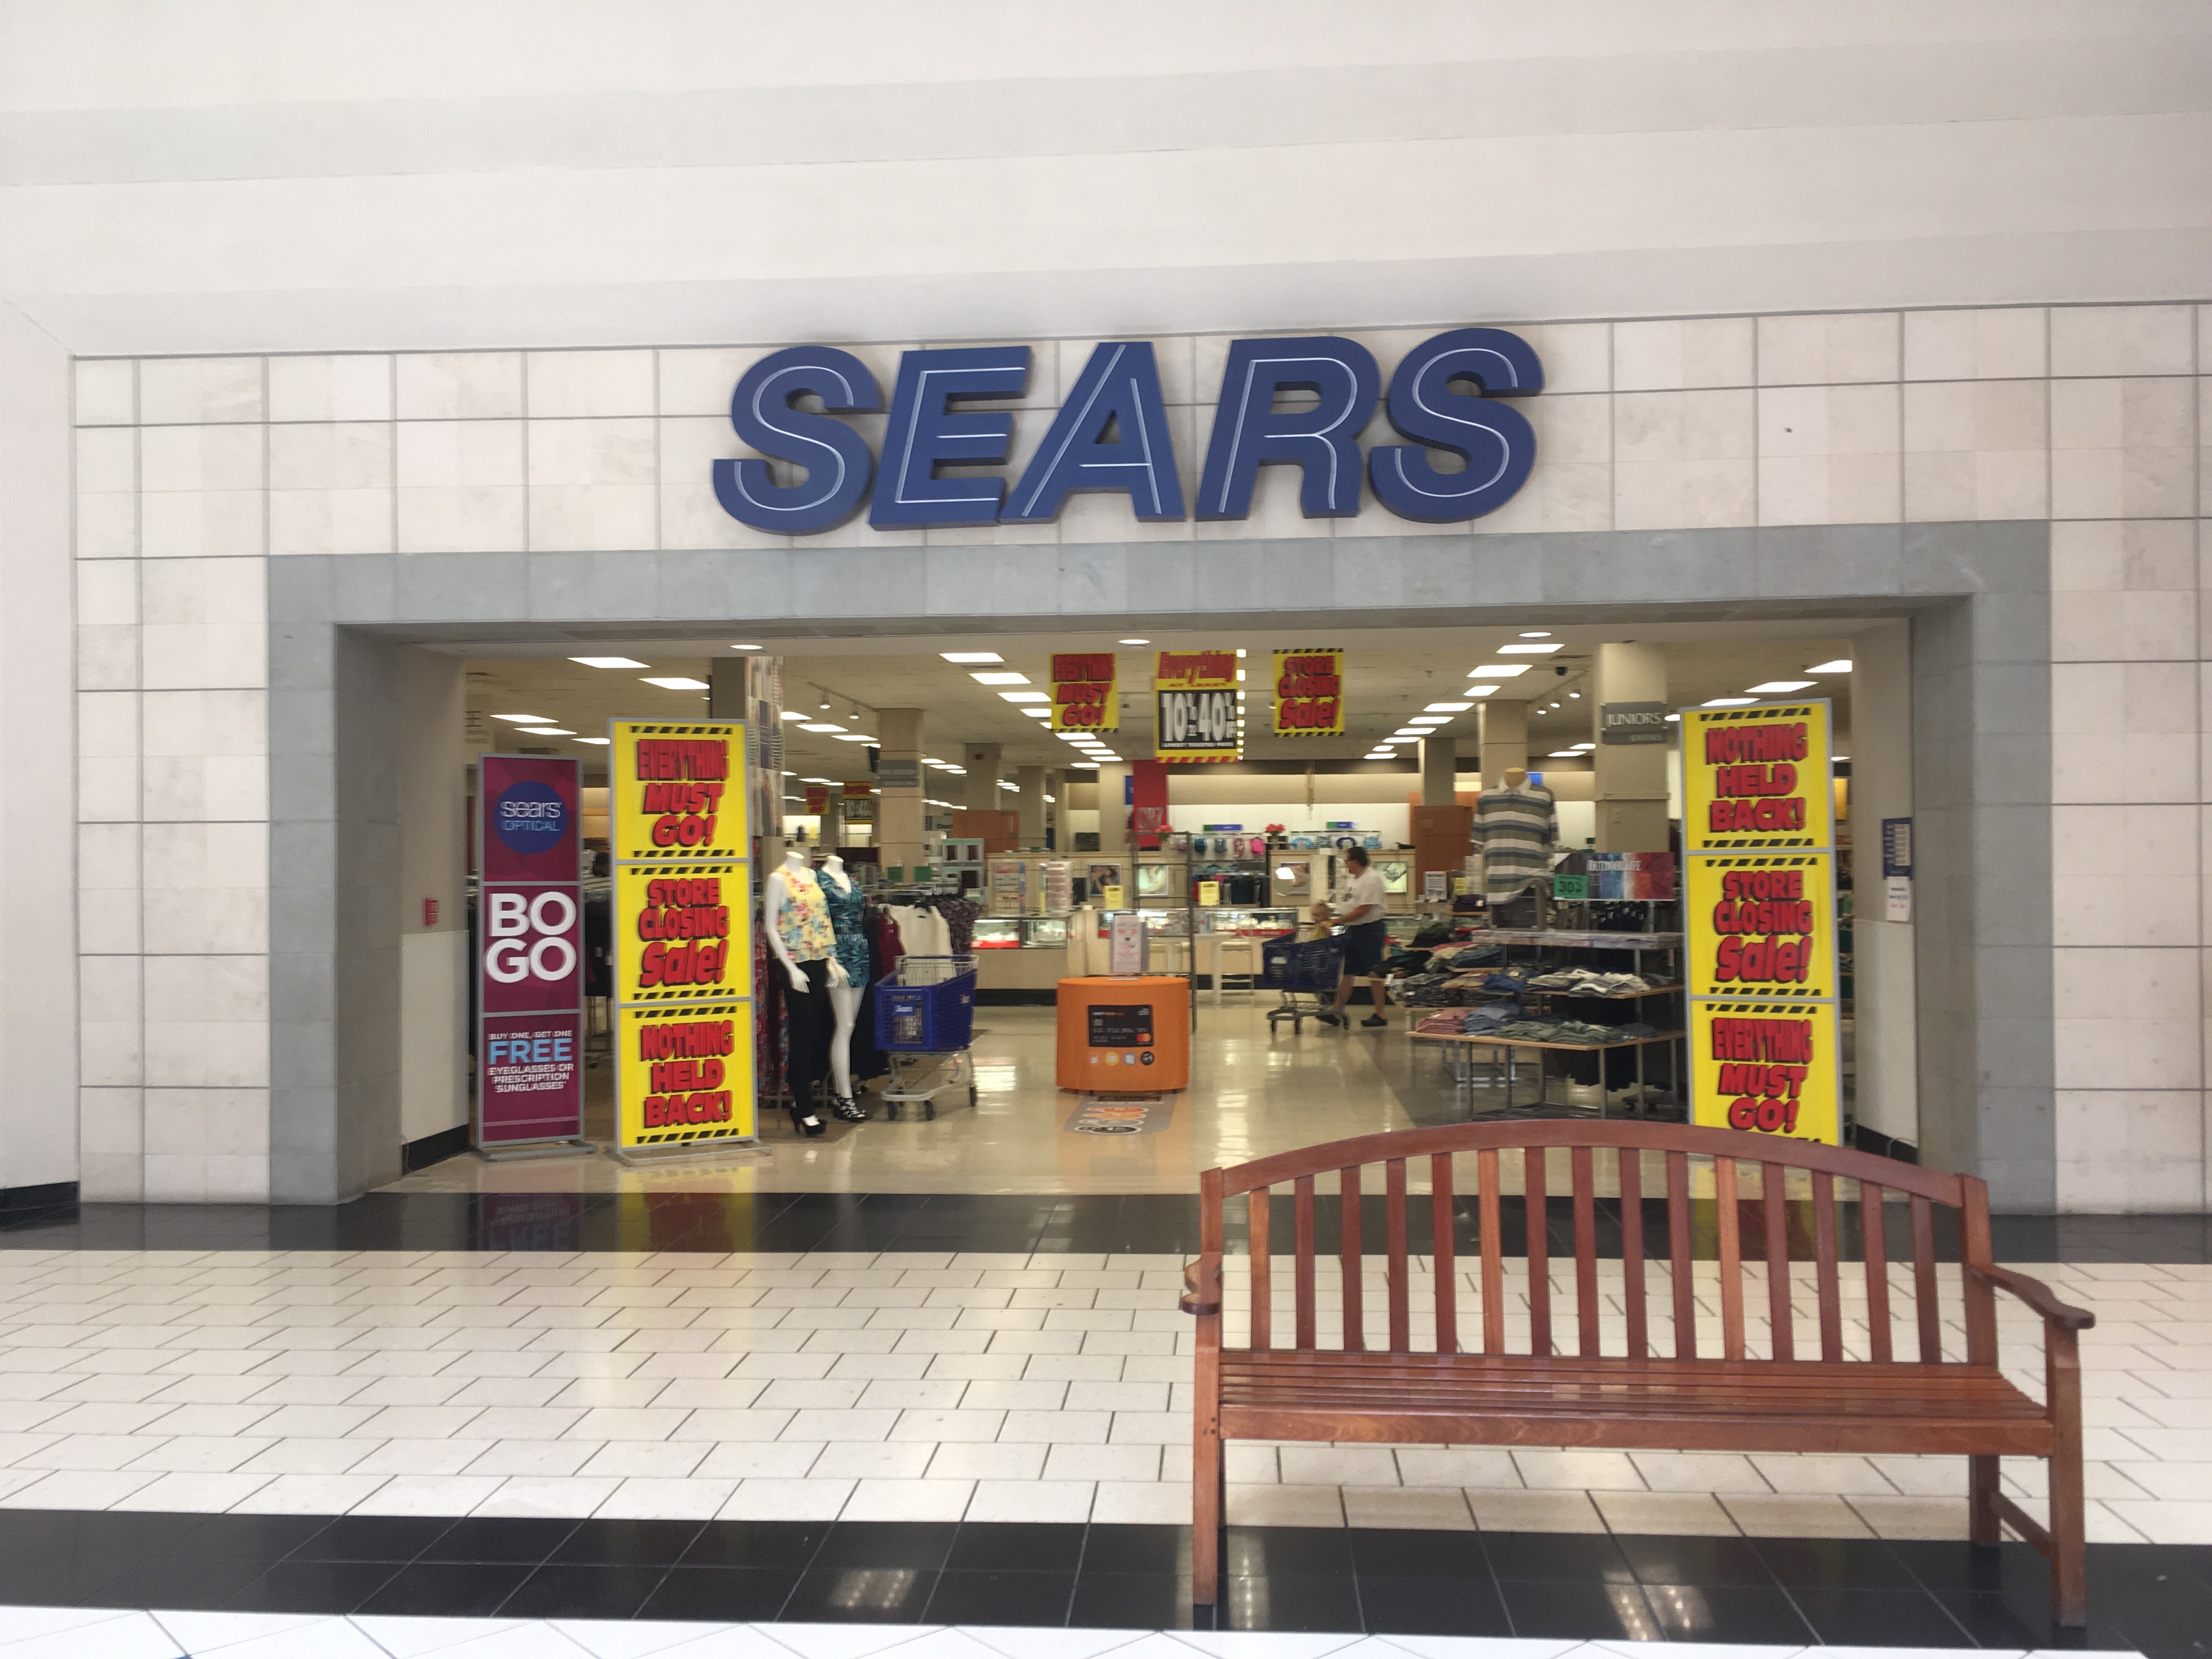 Sears files for bankruptcy